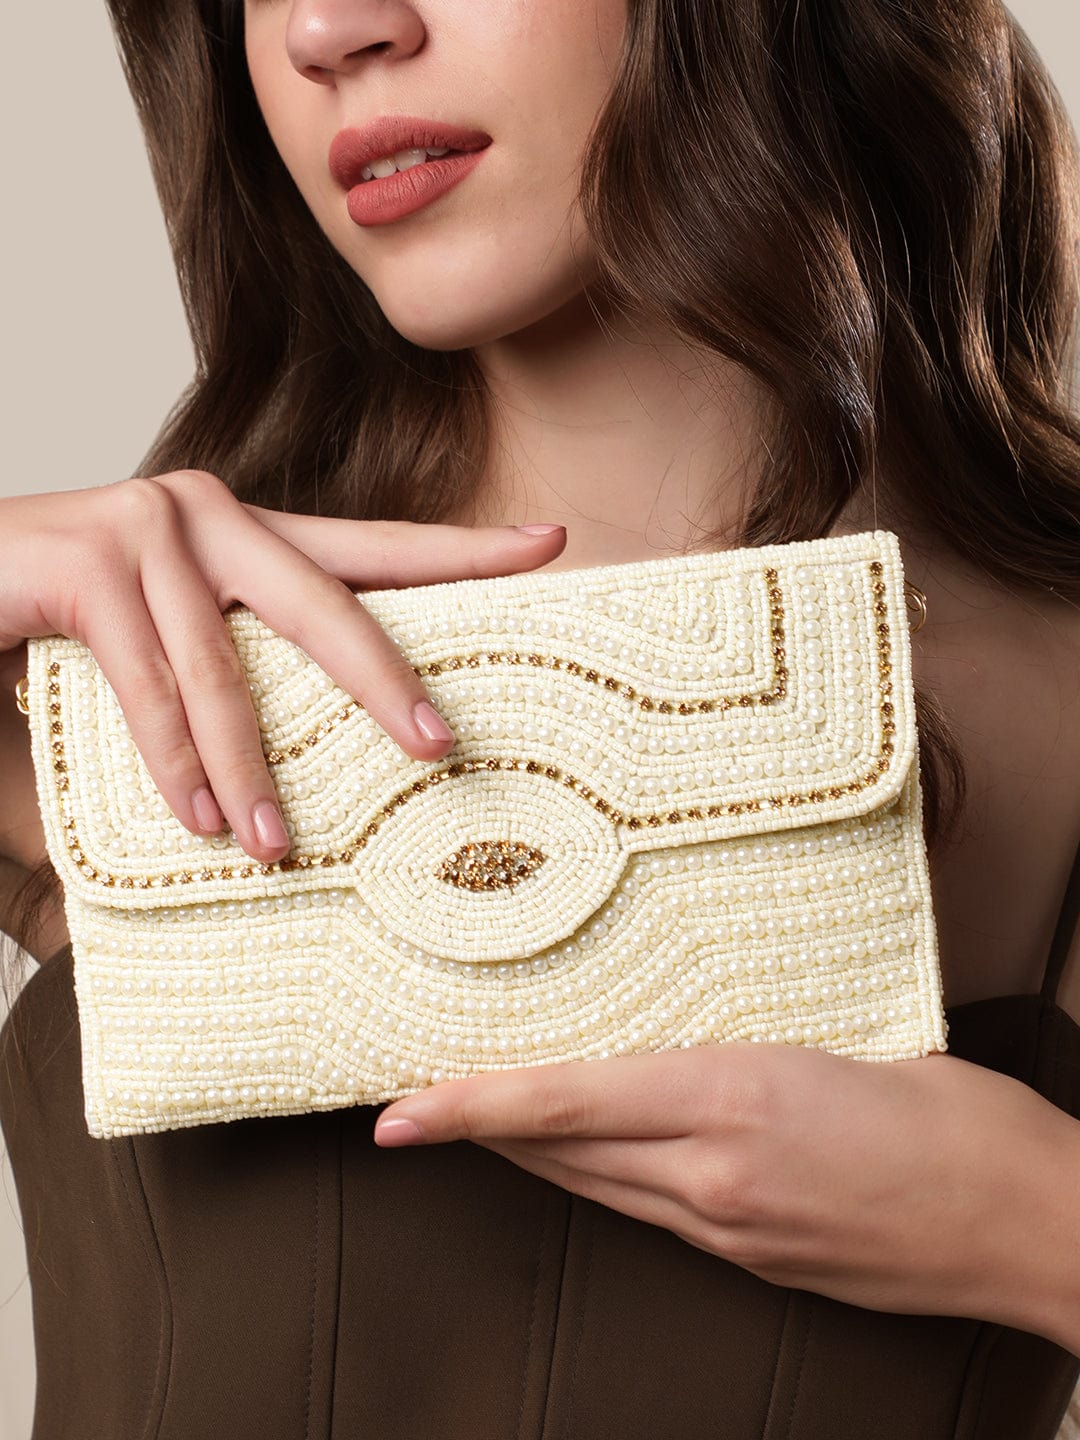 Rubans White Clutch Bags with Pearl and Stone Embellishment Handbag, Wallet Accessories & Clutches